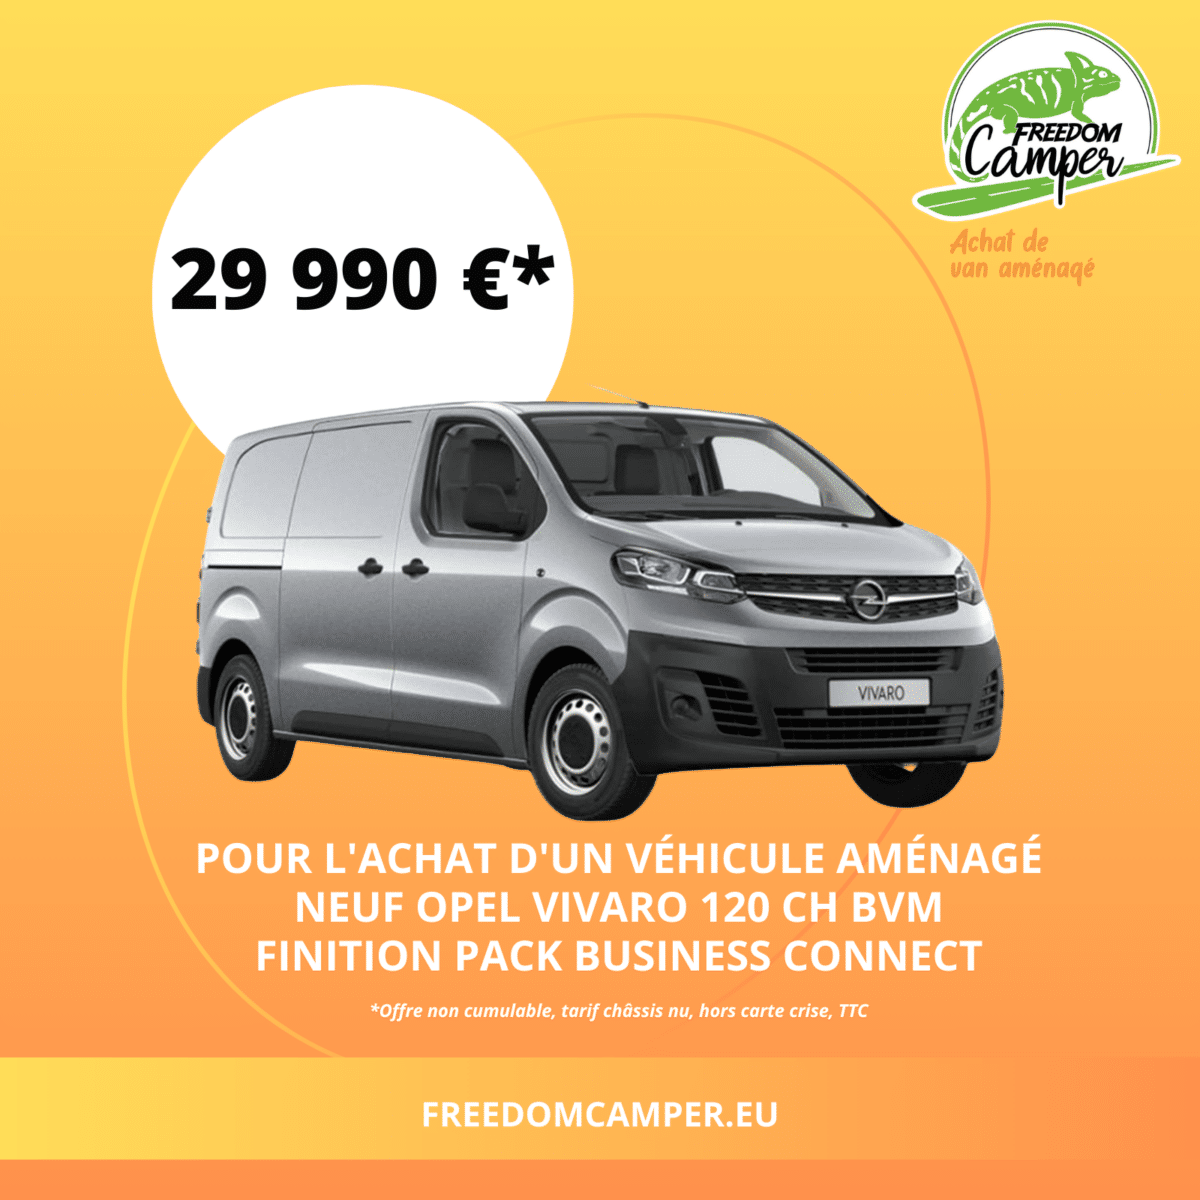 Vente van OPEL neuf finition pack business connect